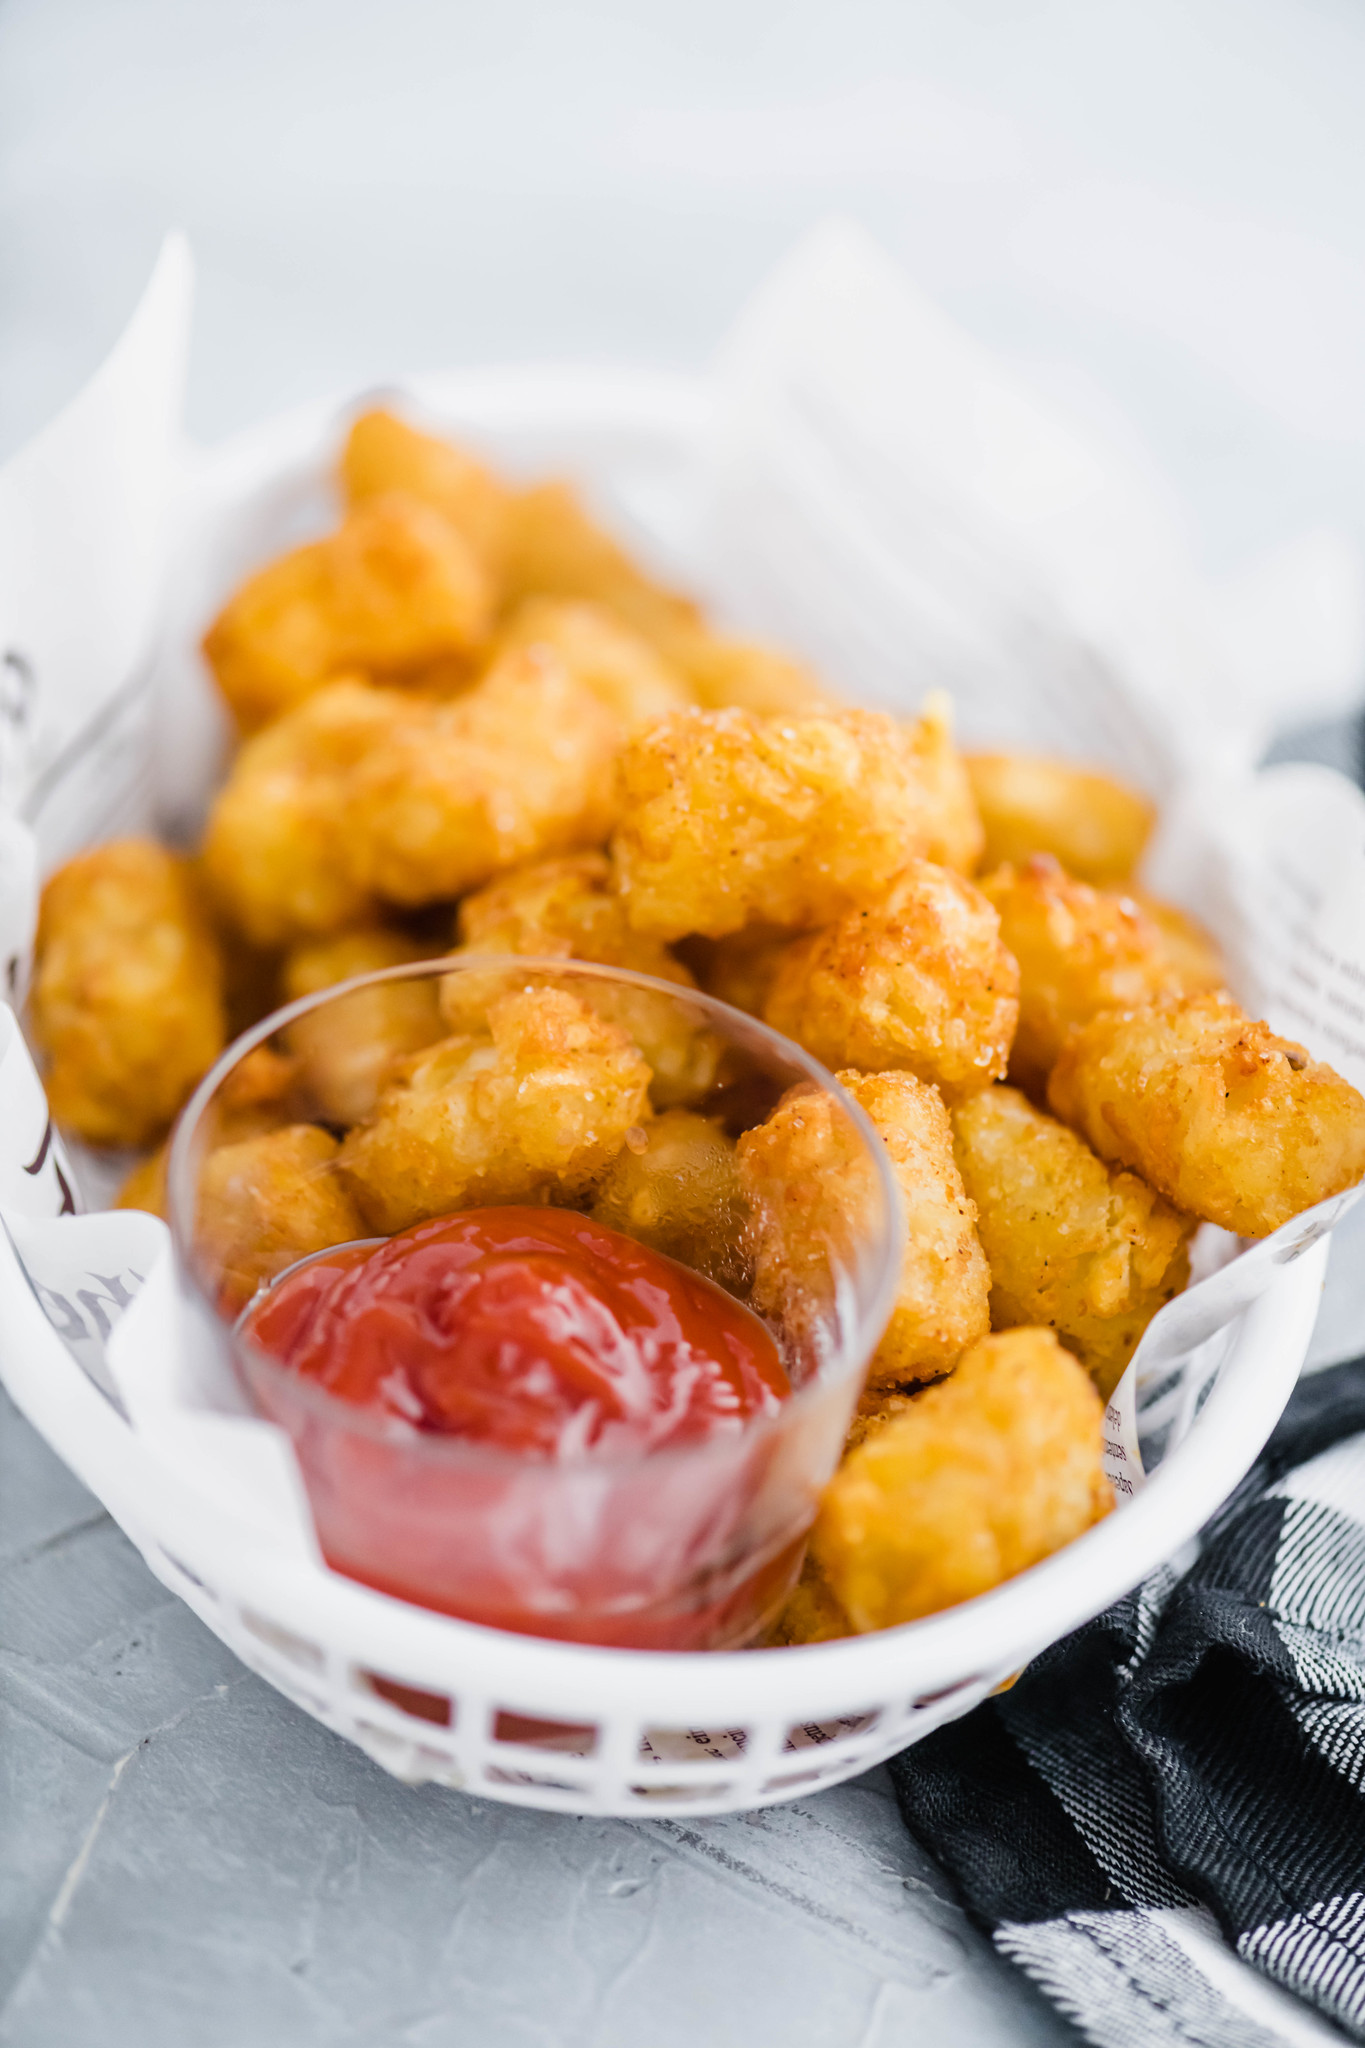 Tater tots in a white plastic fast food basket along with a small glass bowl of ketchup.